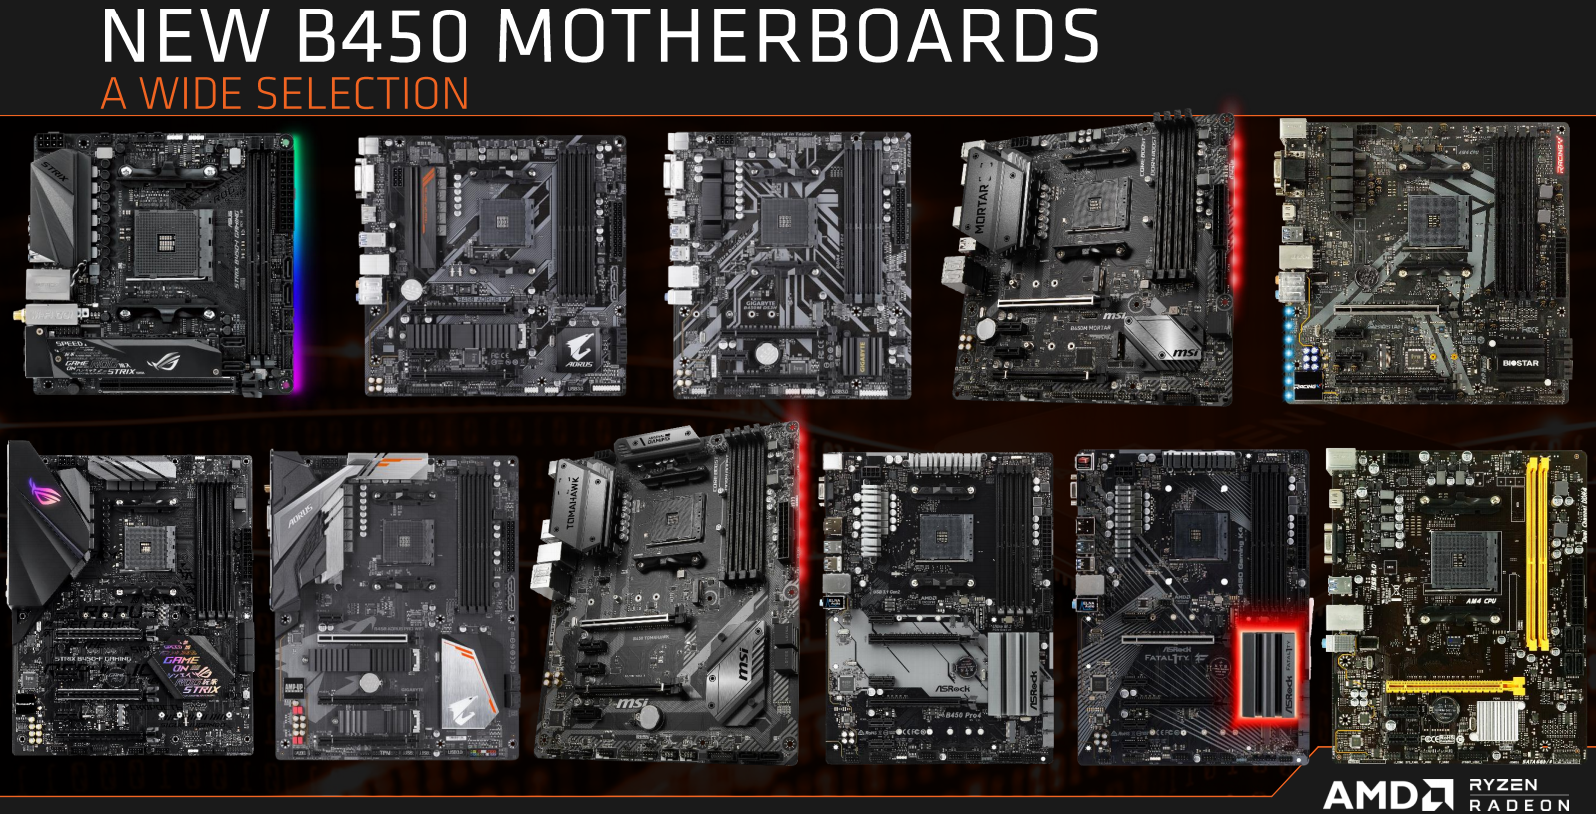 AMD unveils new B450 chipset for mid-range AM4 motherboards | Rock